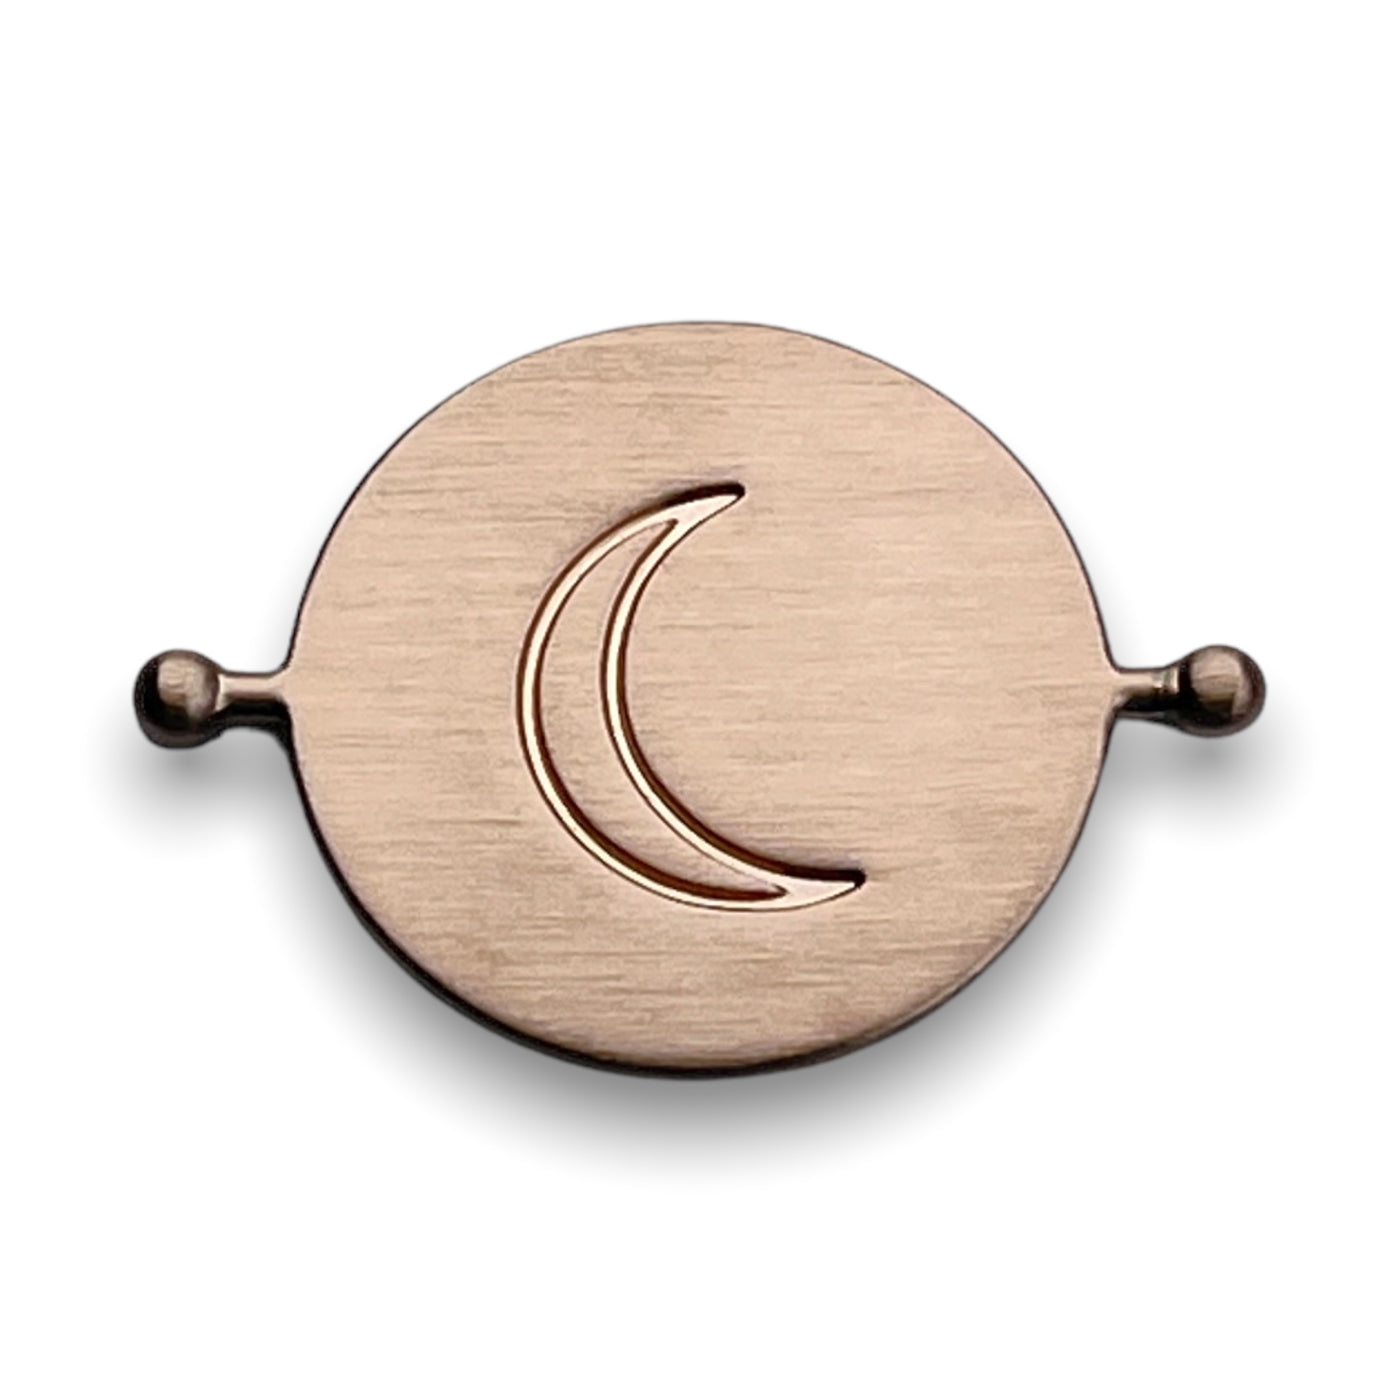 Moon & Stars Symbol Element (spin to combine)